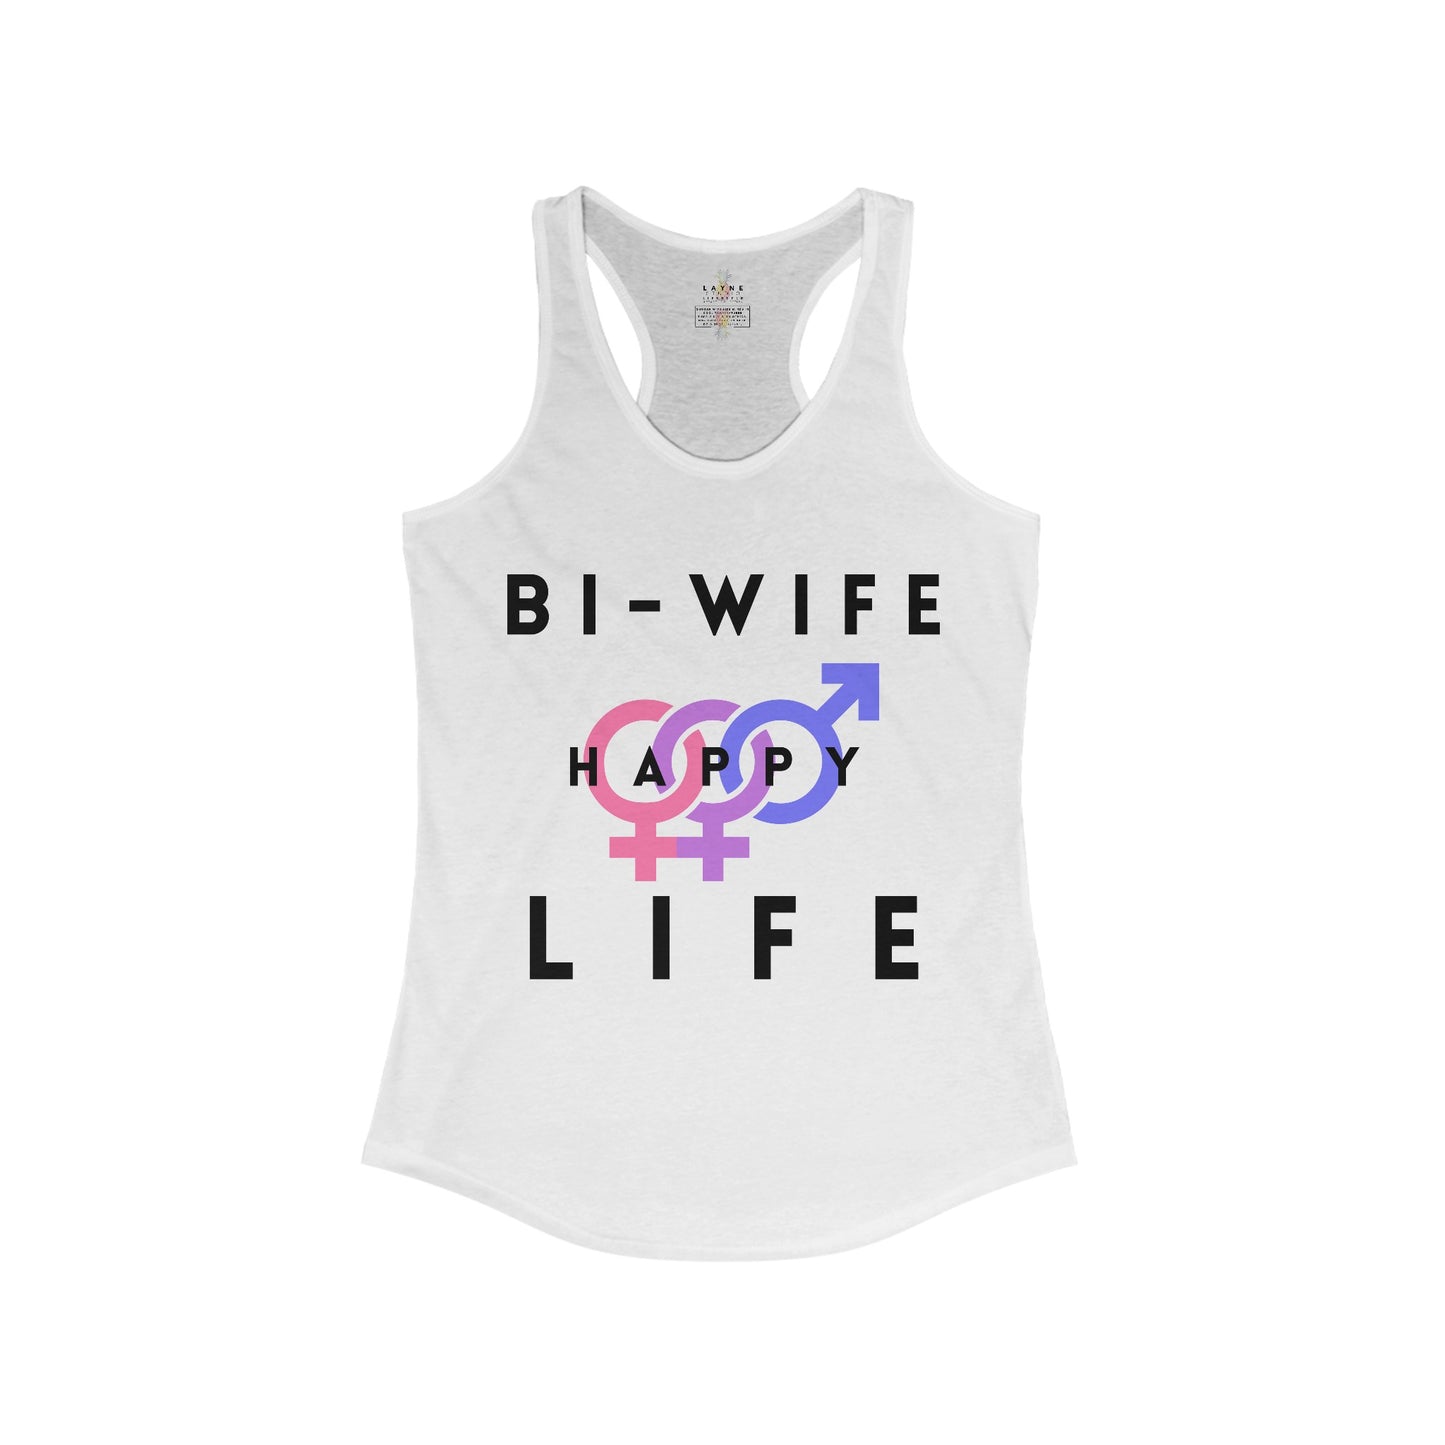 Front View of Layne Studios "Bi-Wife Happy Life" Graphic Solid White Tank-Top